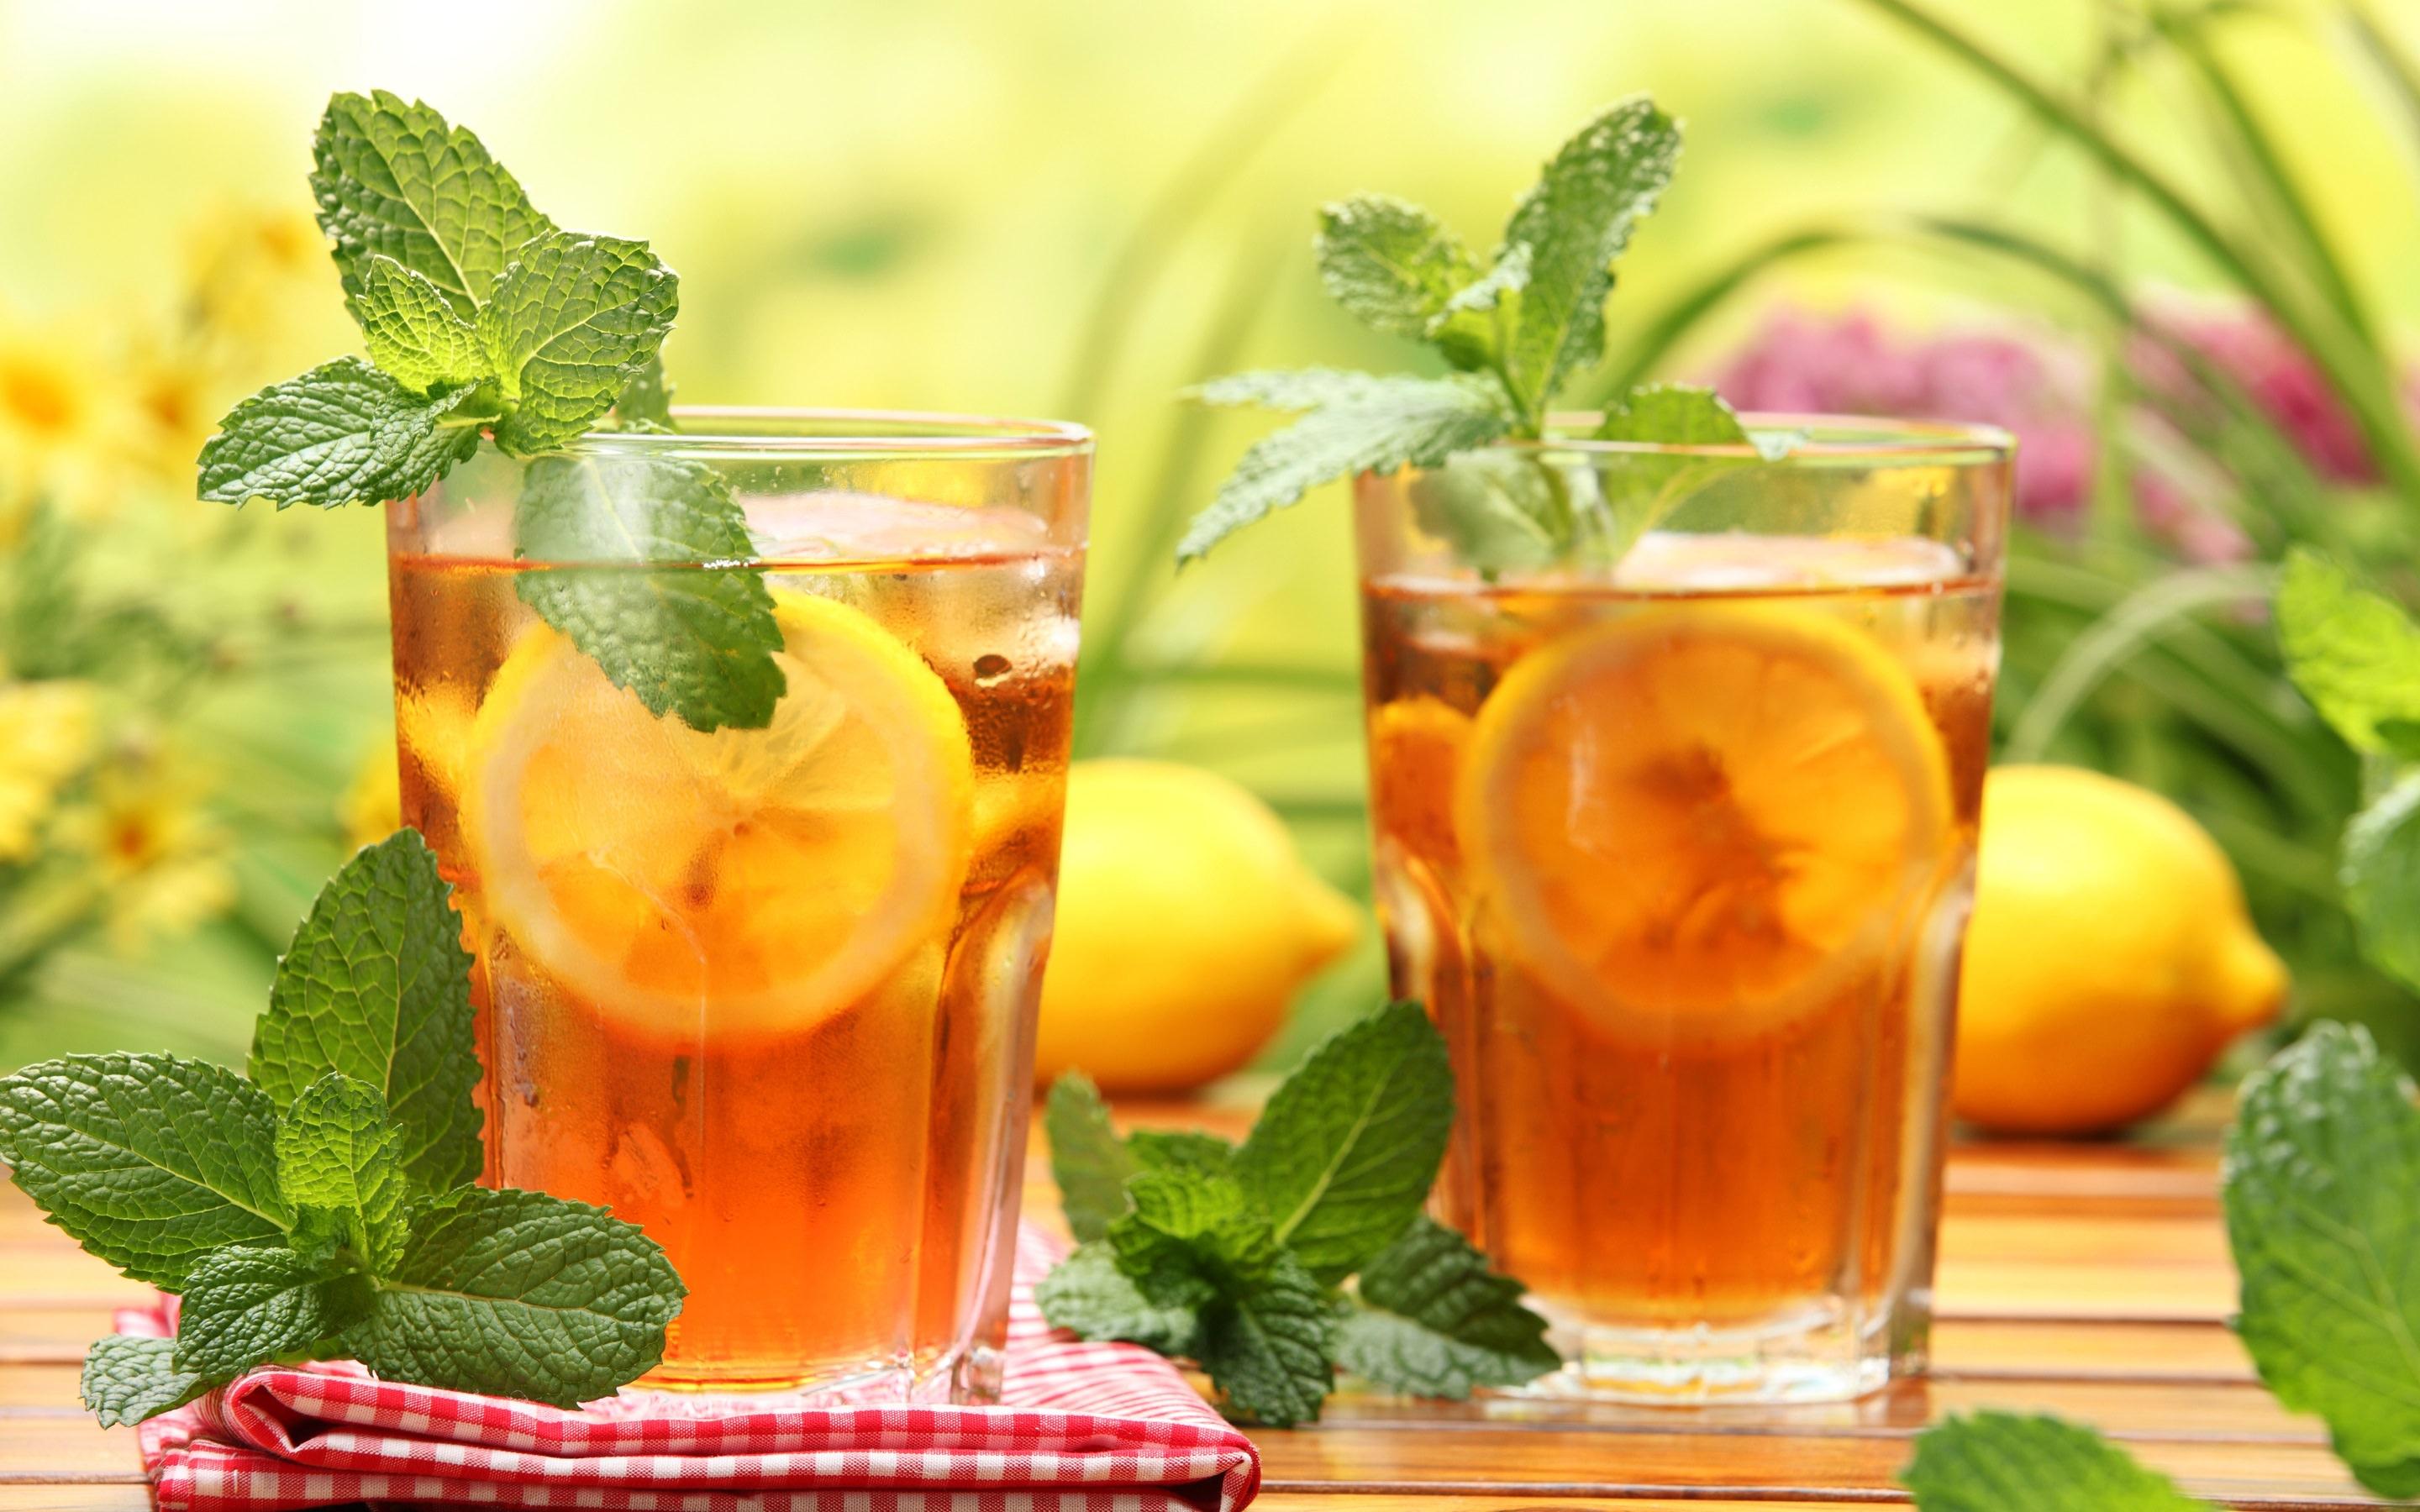 Lemon iced tea. Best HD Wallpaper and Covers